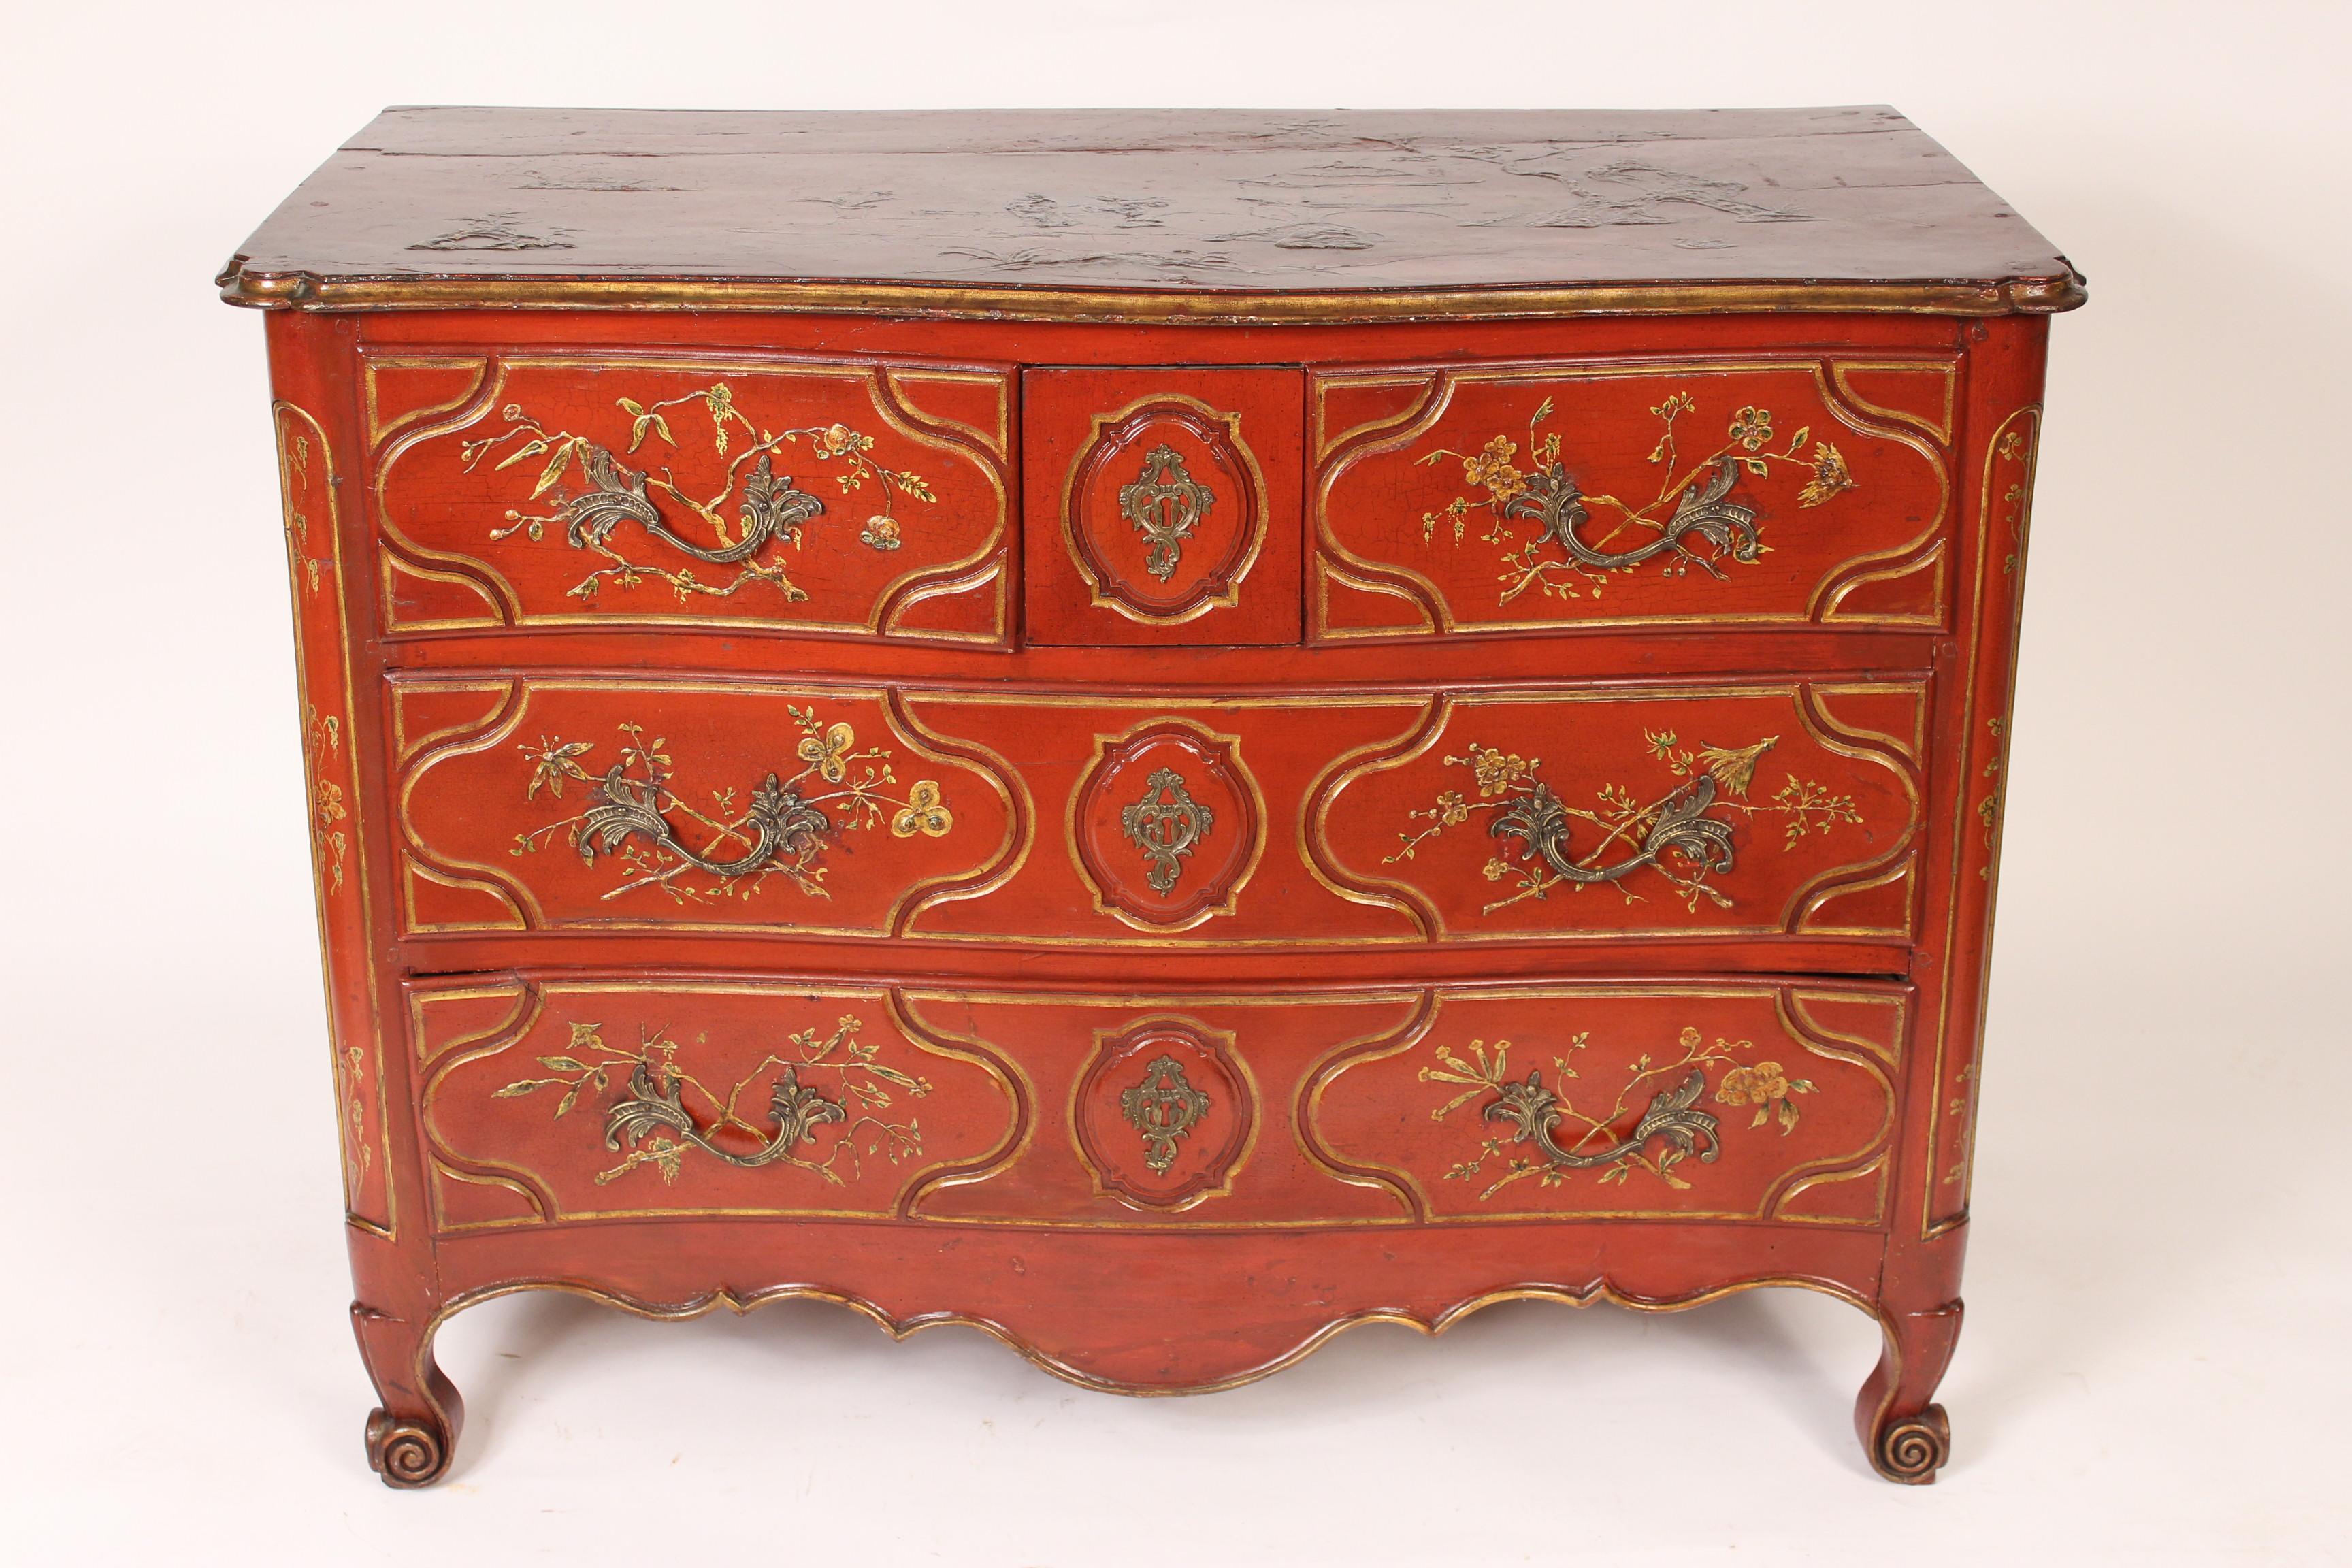 Antique Louis XV provincial style red chinoiserie decorated chest of drawers, 19th century. Chinoiserie decoration is early 20th century